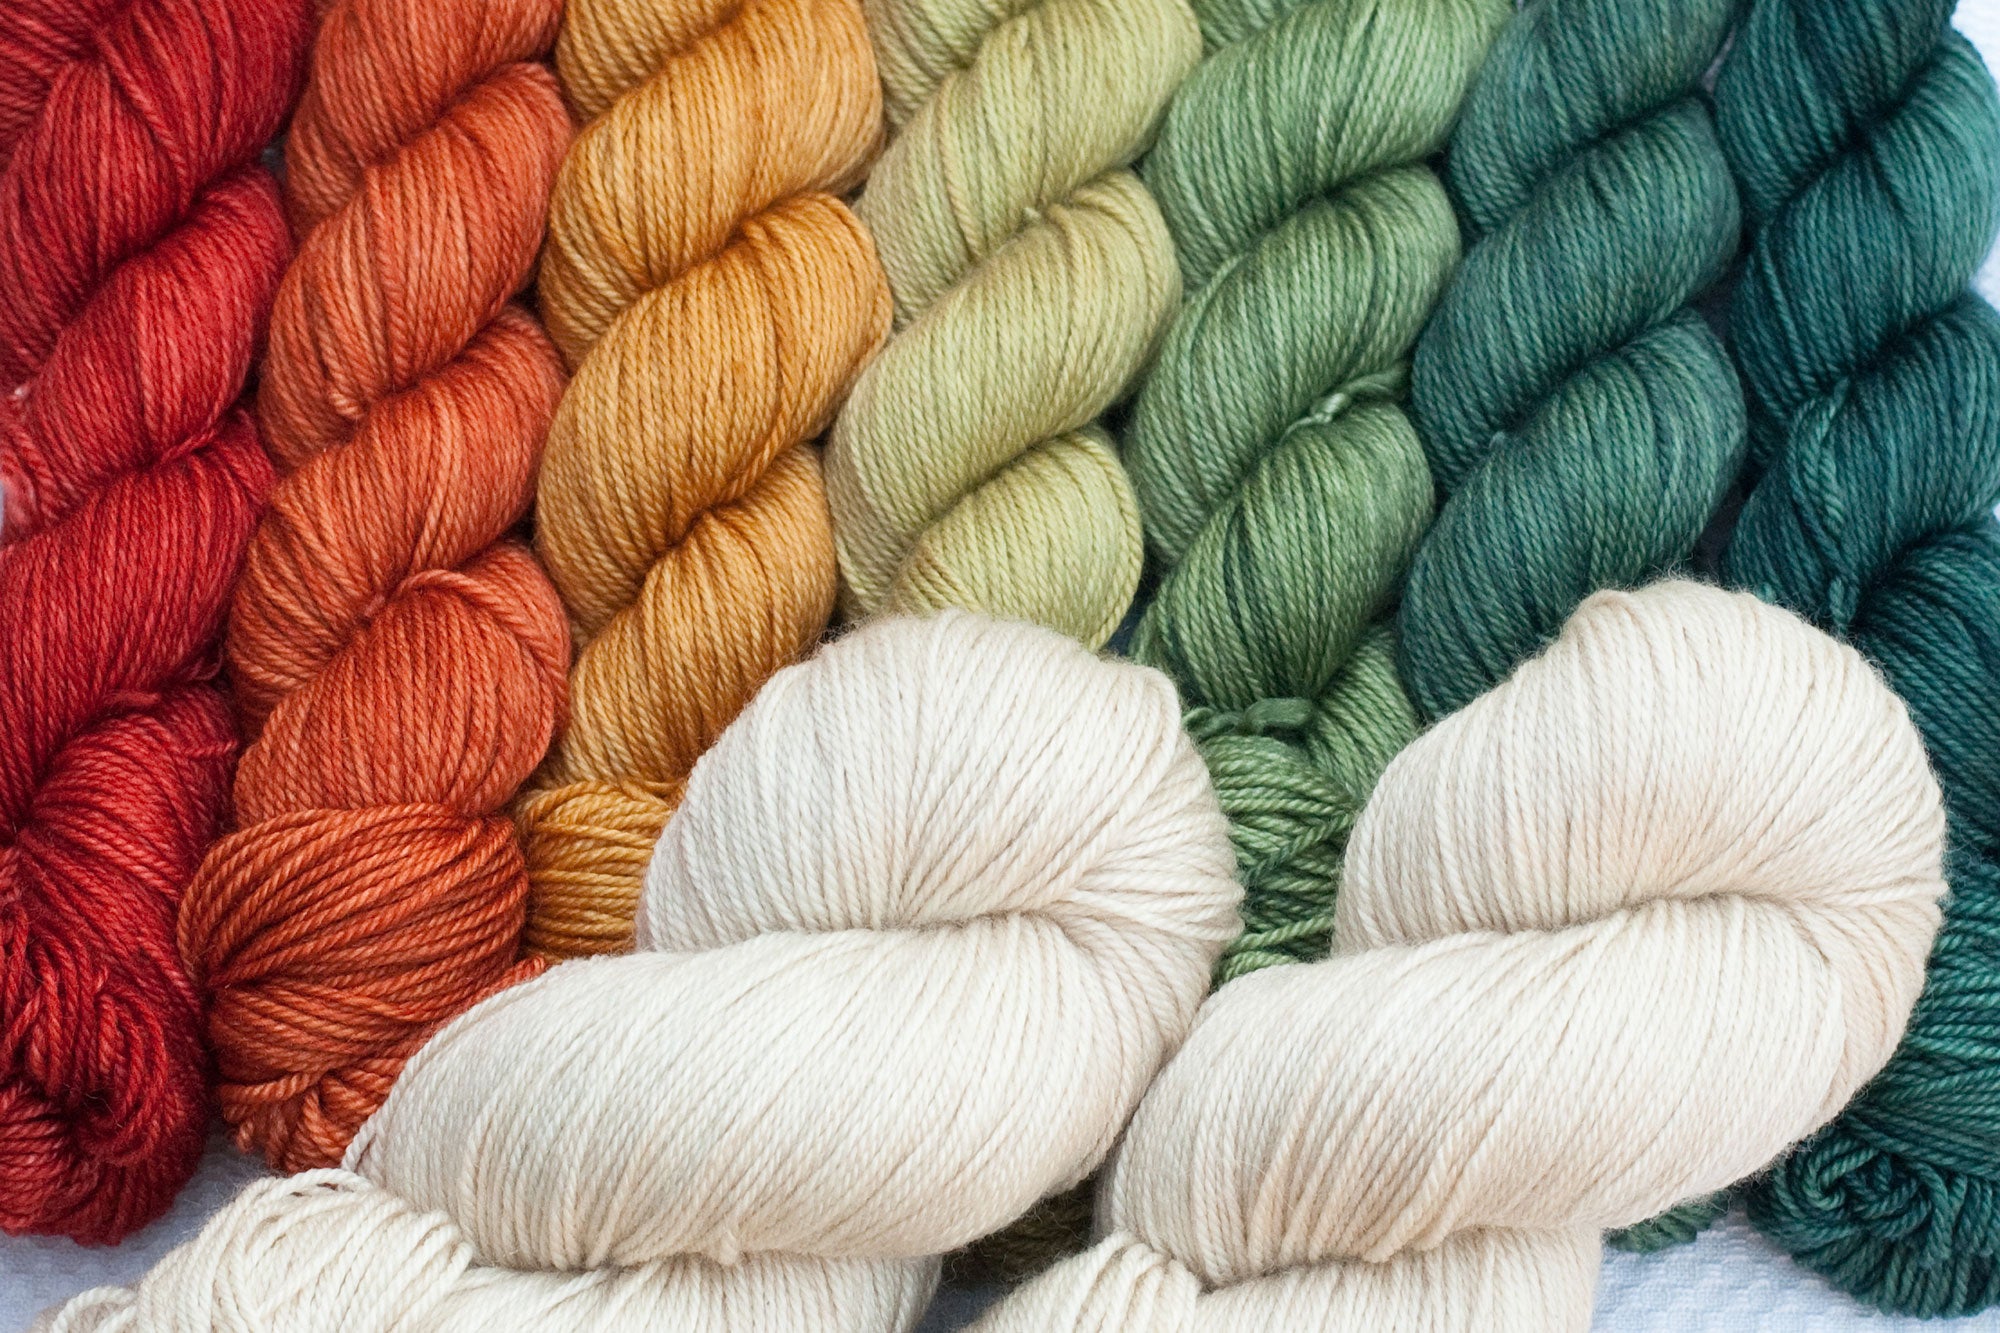 mountain musing mkal hand-dyed yarn set with cream main colour and autumnal gradient contrast set